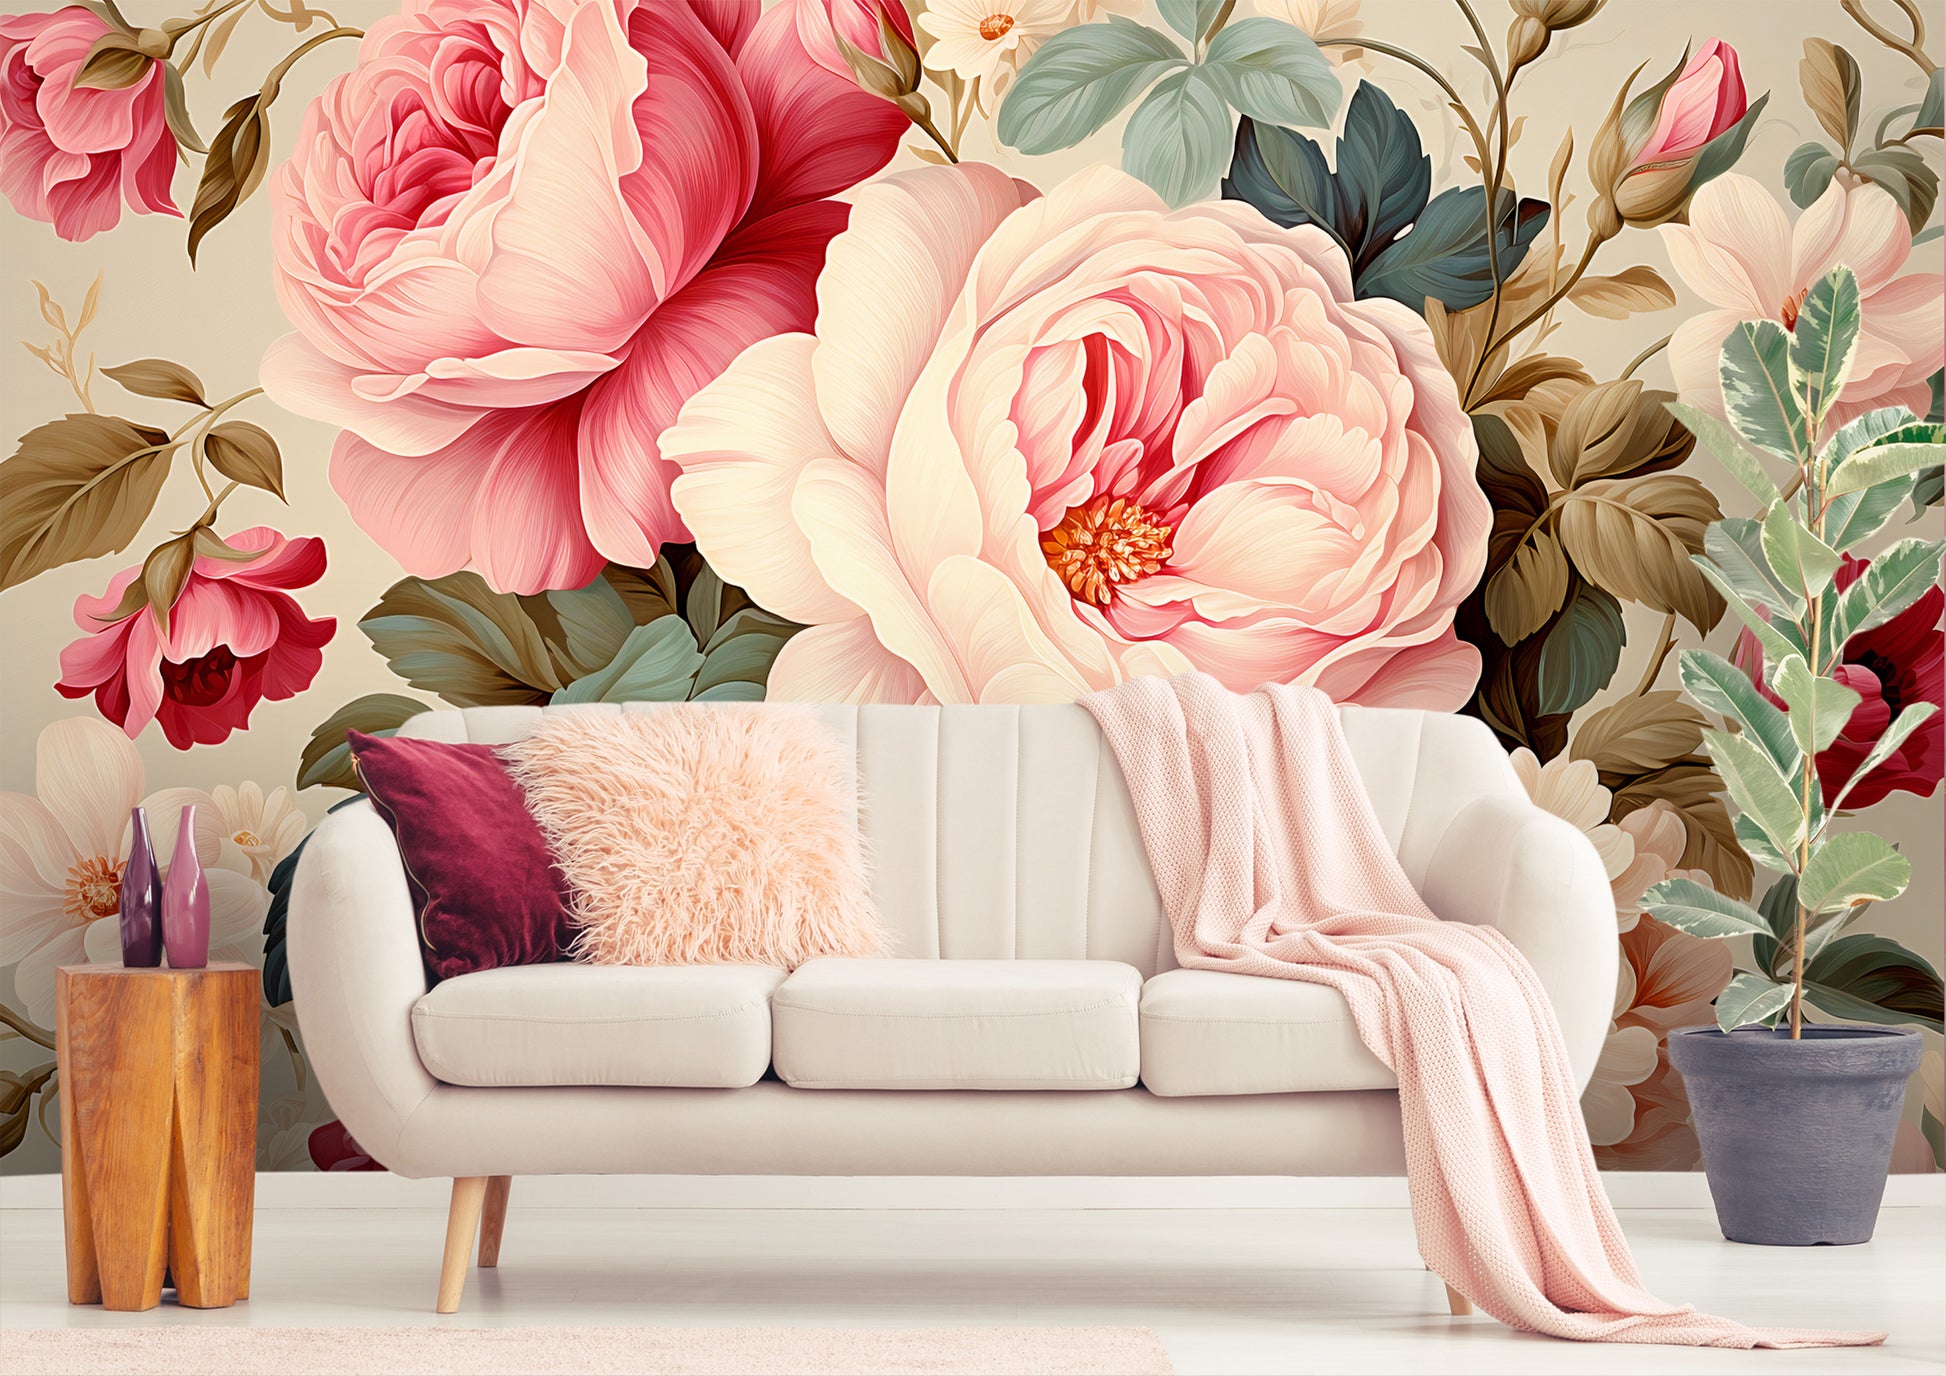 Vintage-inspired Pink Rose Peel and Stick Mural